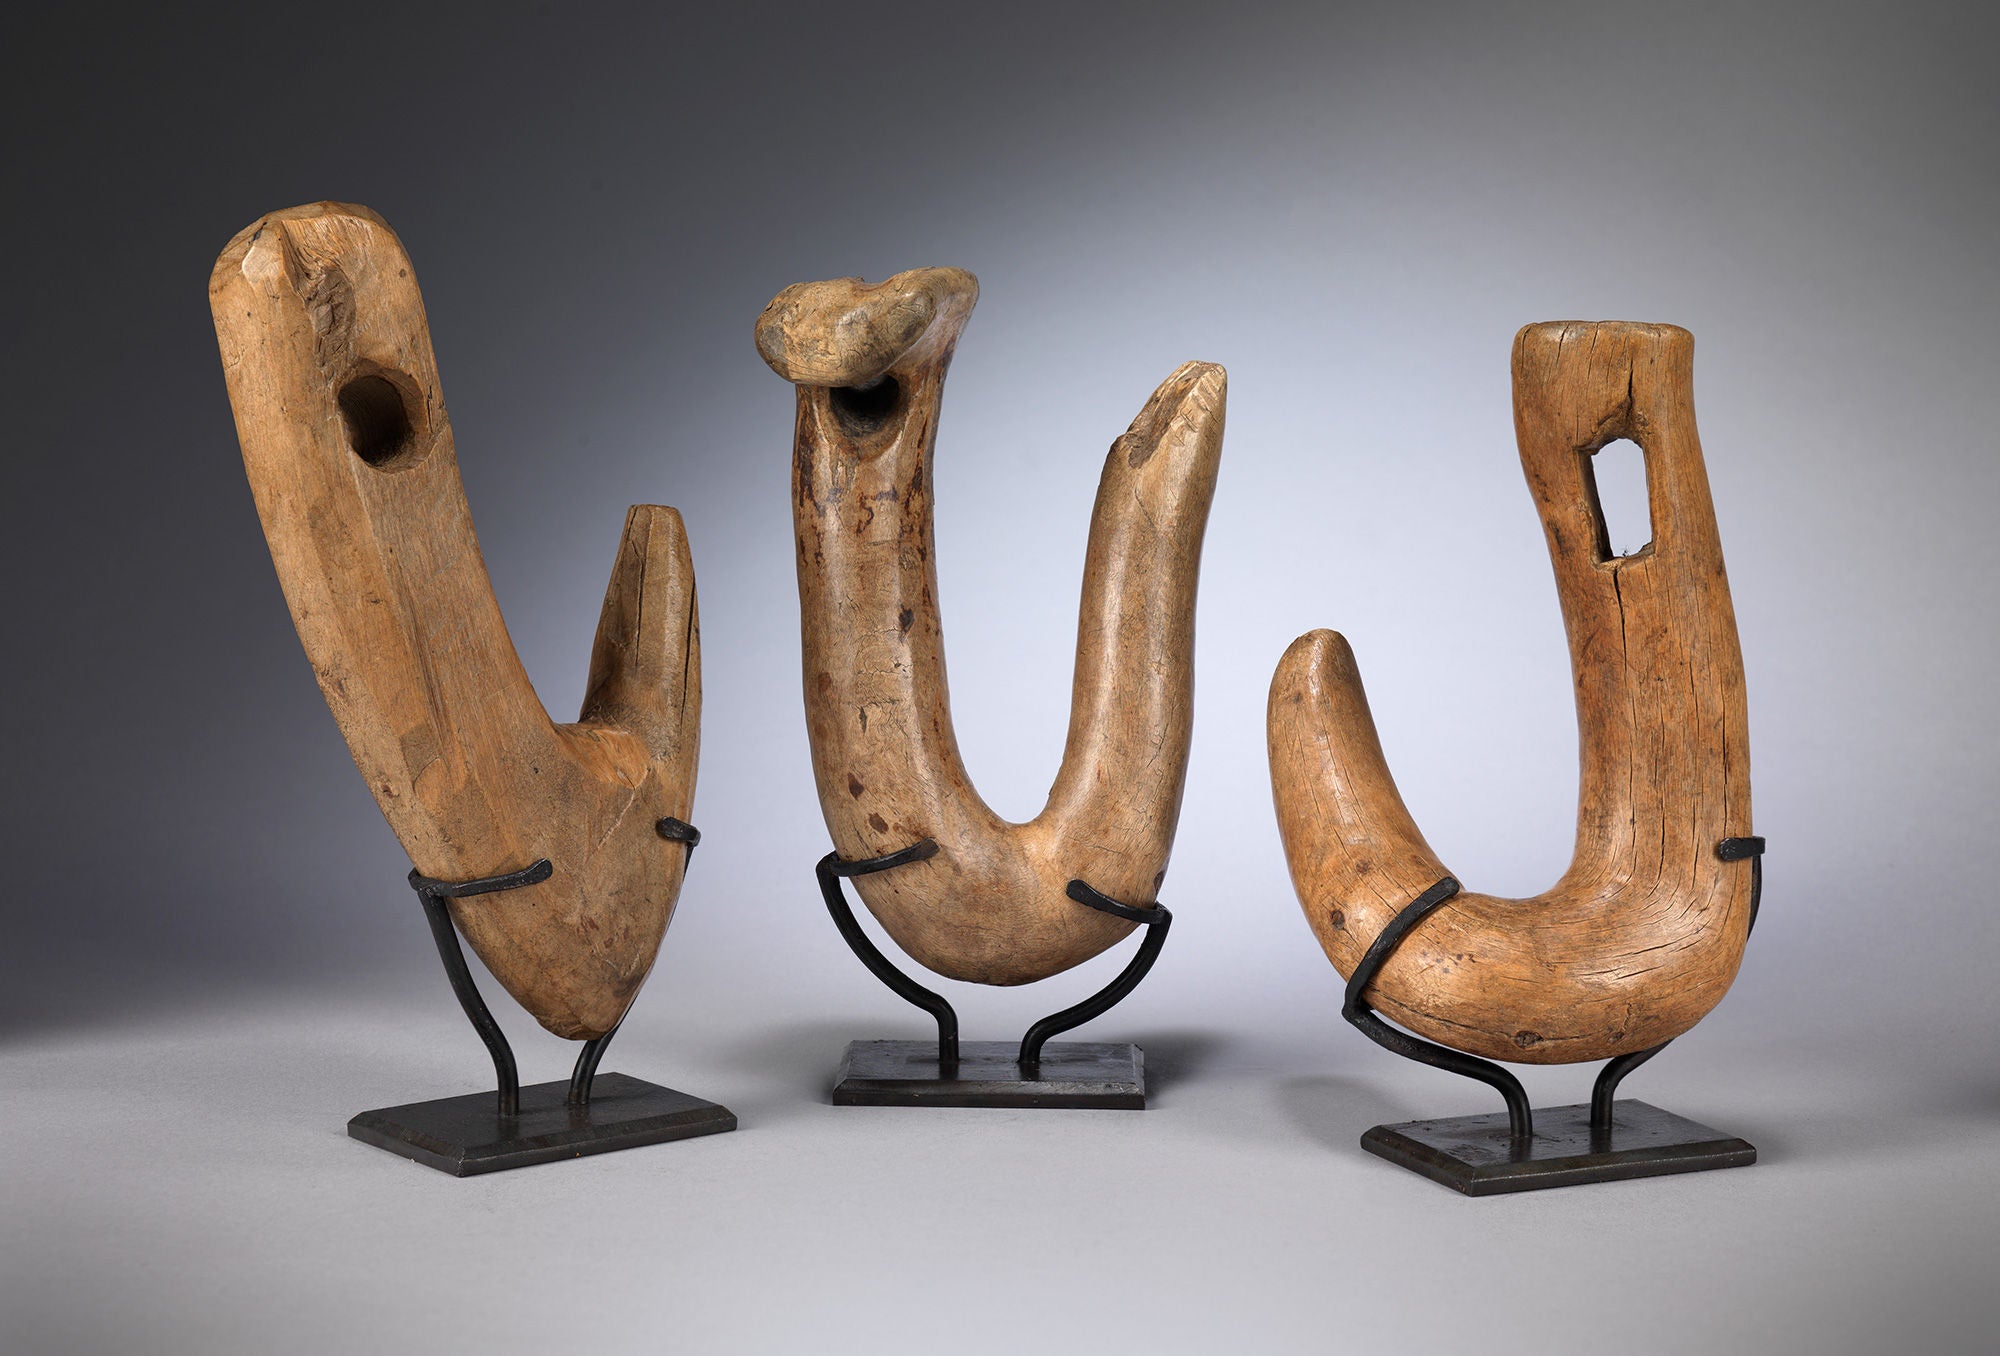 Sculptural Group of Three Fisherman's Hooks